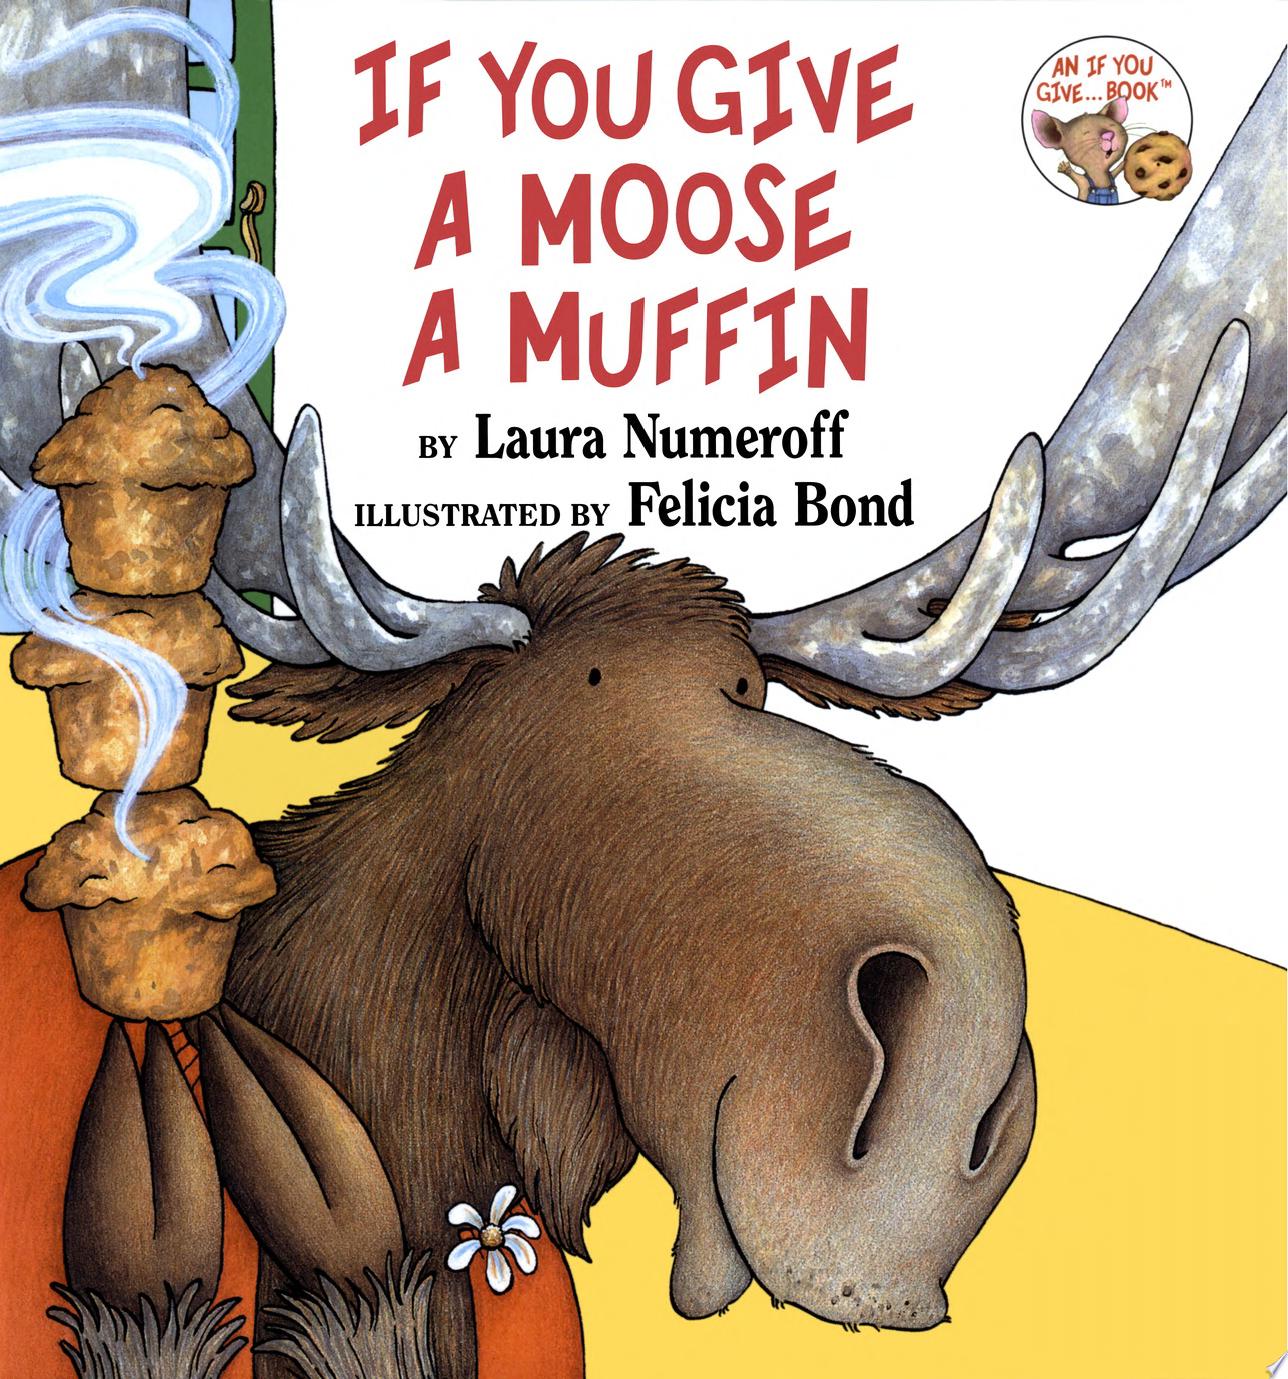 Image for "If You Give a Moose a Muffin"